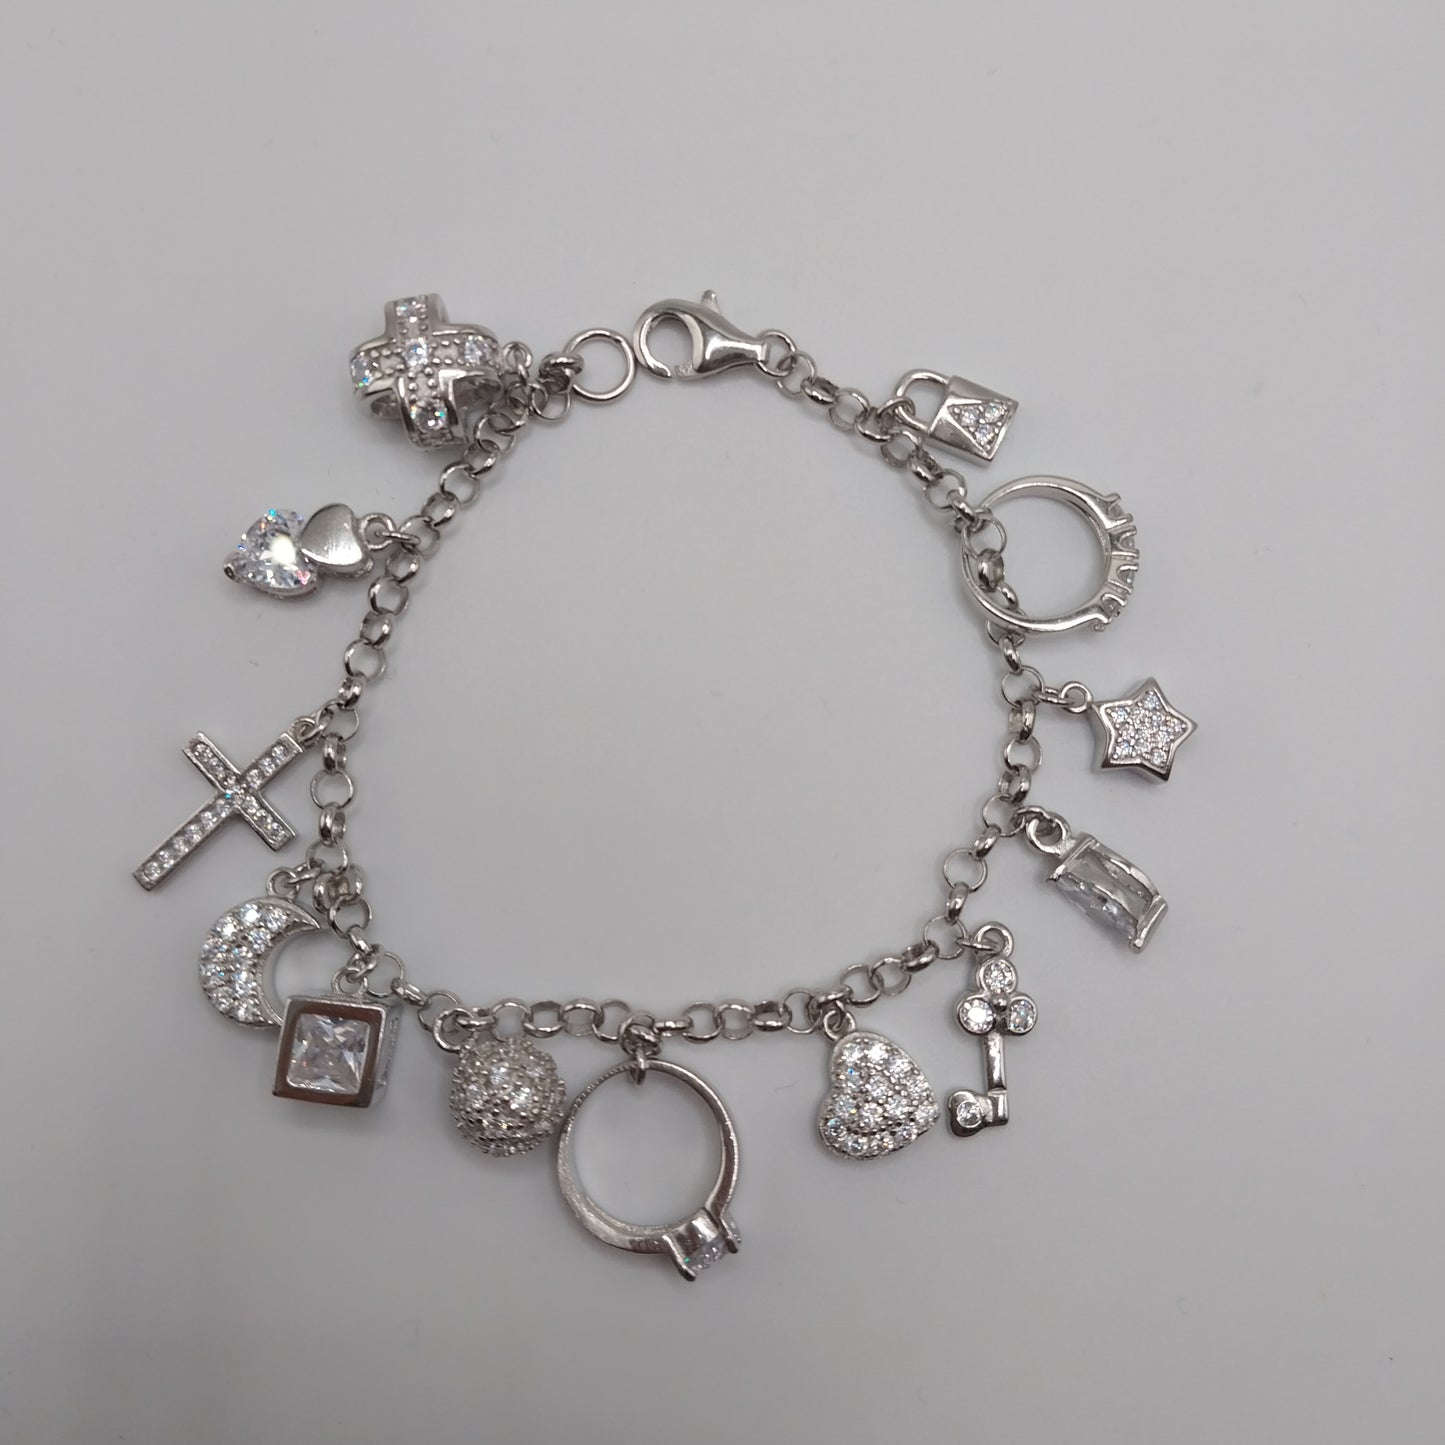 Silver 925 Bracelet with 13 Charms